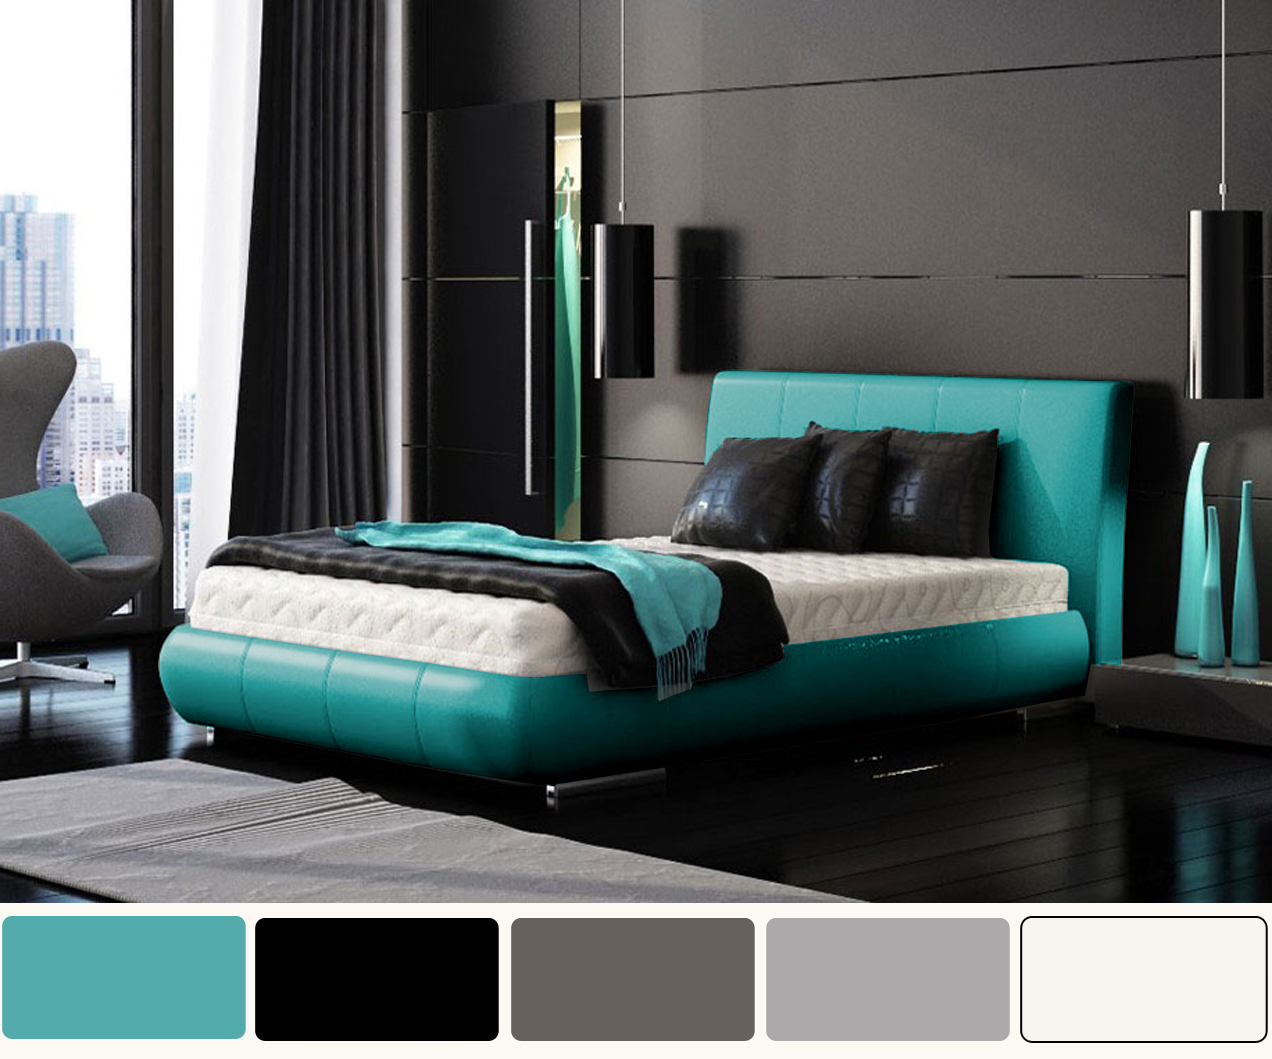 Turquoise And White Pearl Bedroom Design - Native Home 